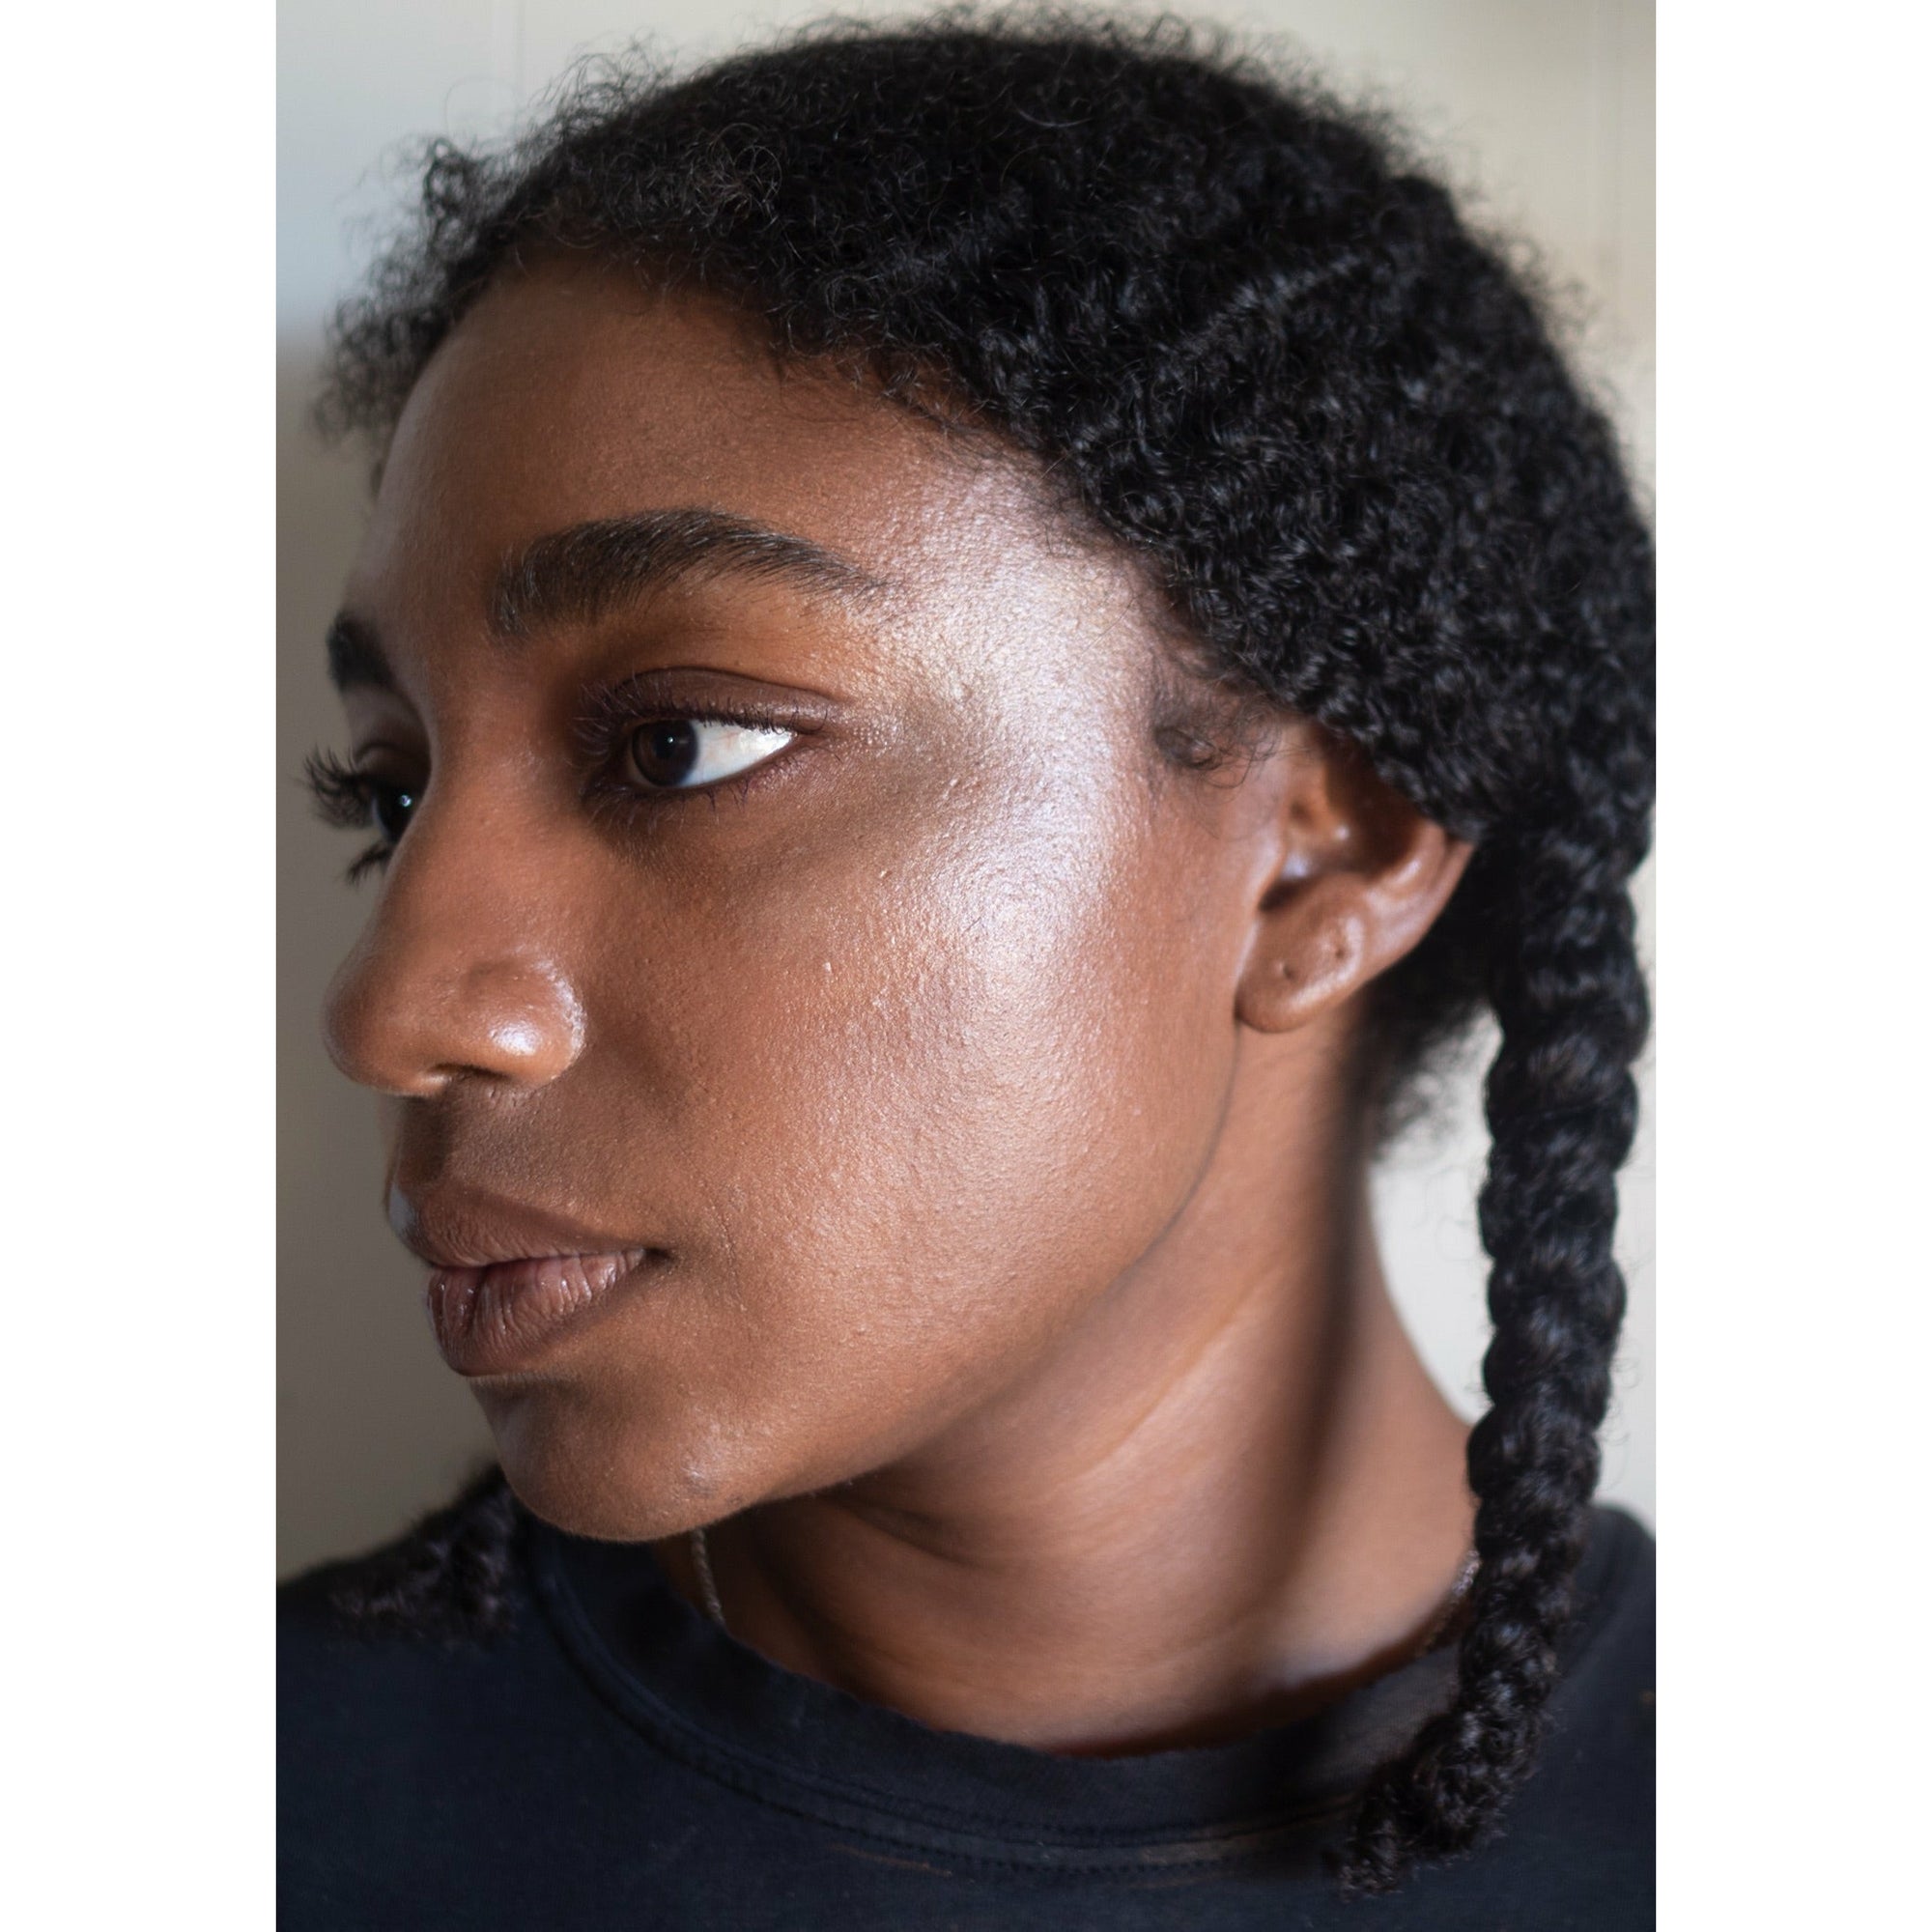 Woman's profile with beam face highlighter applied on cheekbone